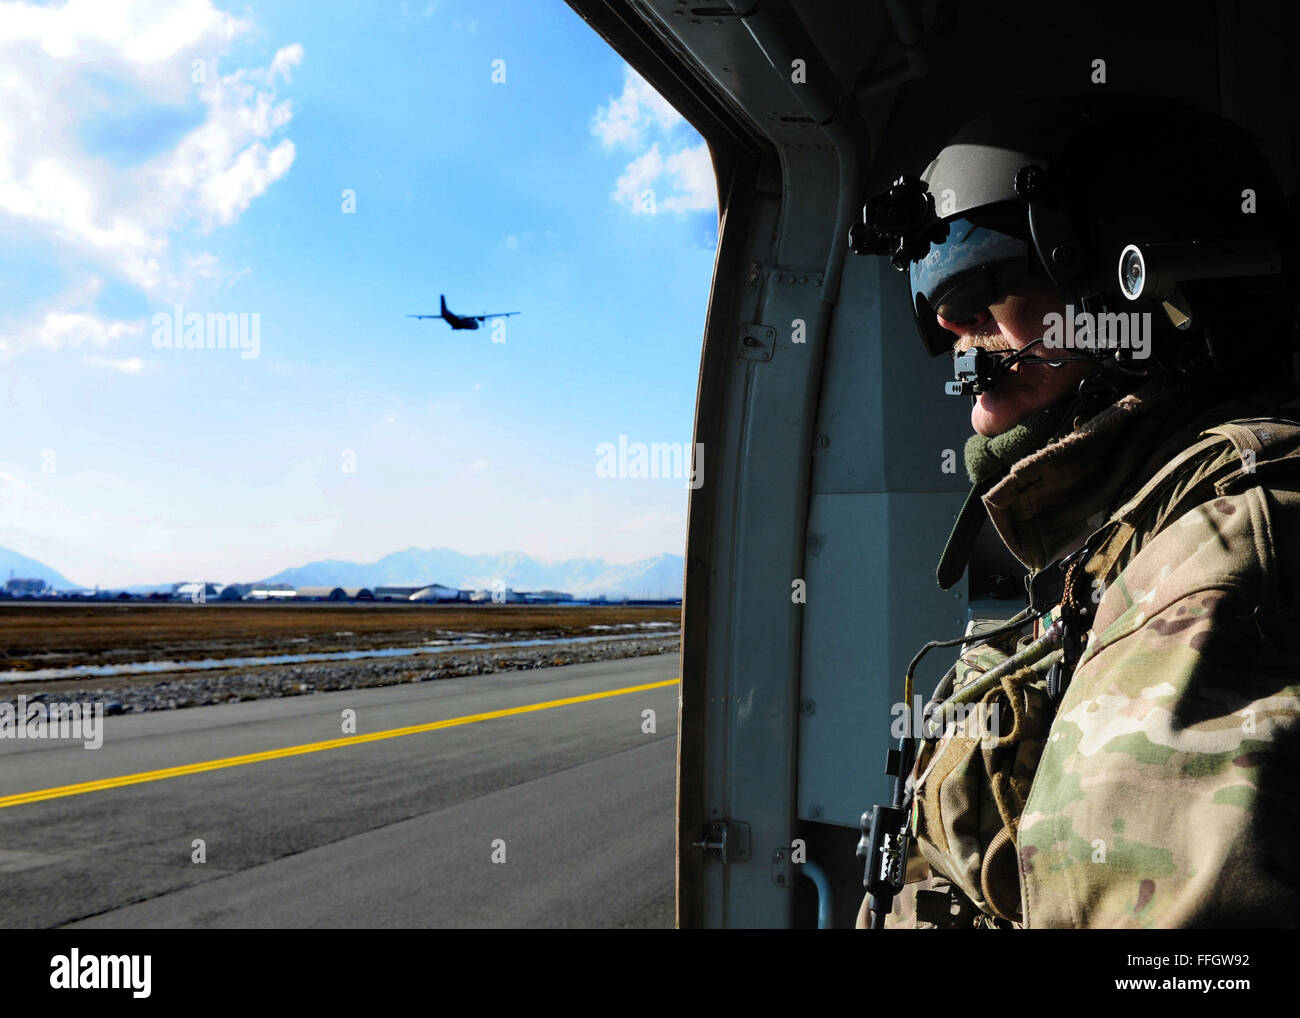 Senior Master Sgt. Todd Peplow, an aerial gunner with the 438th Air Expeditionary Advisory Squadron, overlooks the Kabul International Airport flightline after completing a flight between Jalalabad and Kabul, Afghanistan. Peplow is currently deployed to provide advisory training for Afghan air force flight engineers. Stock Photo